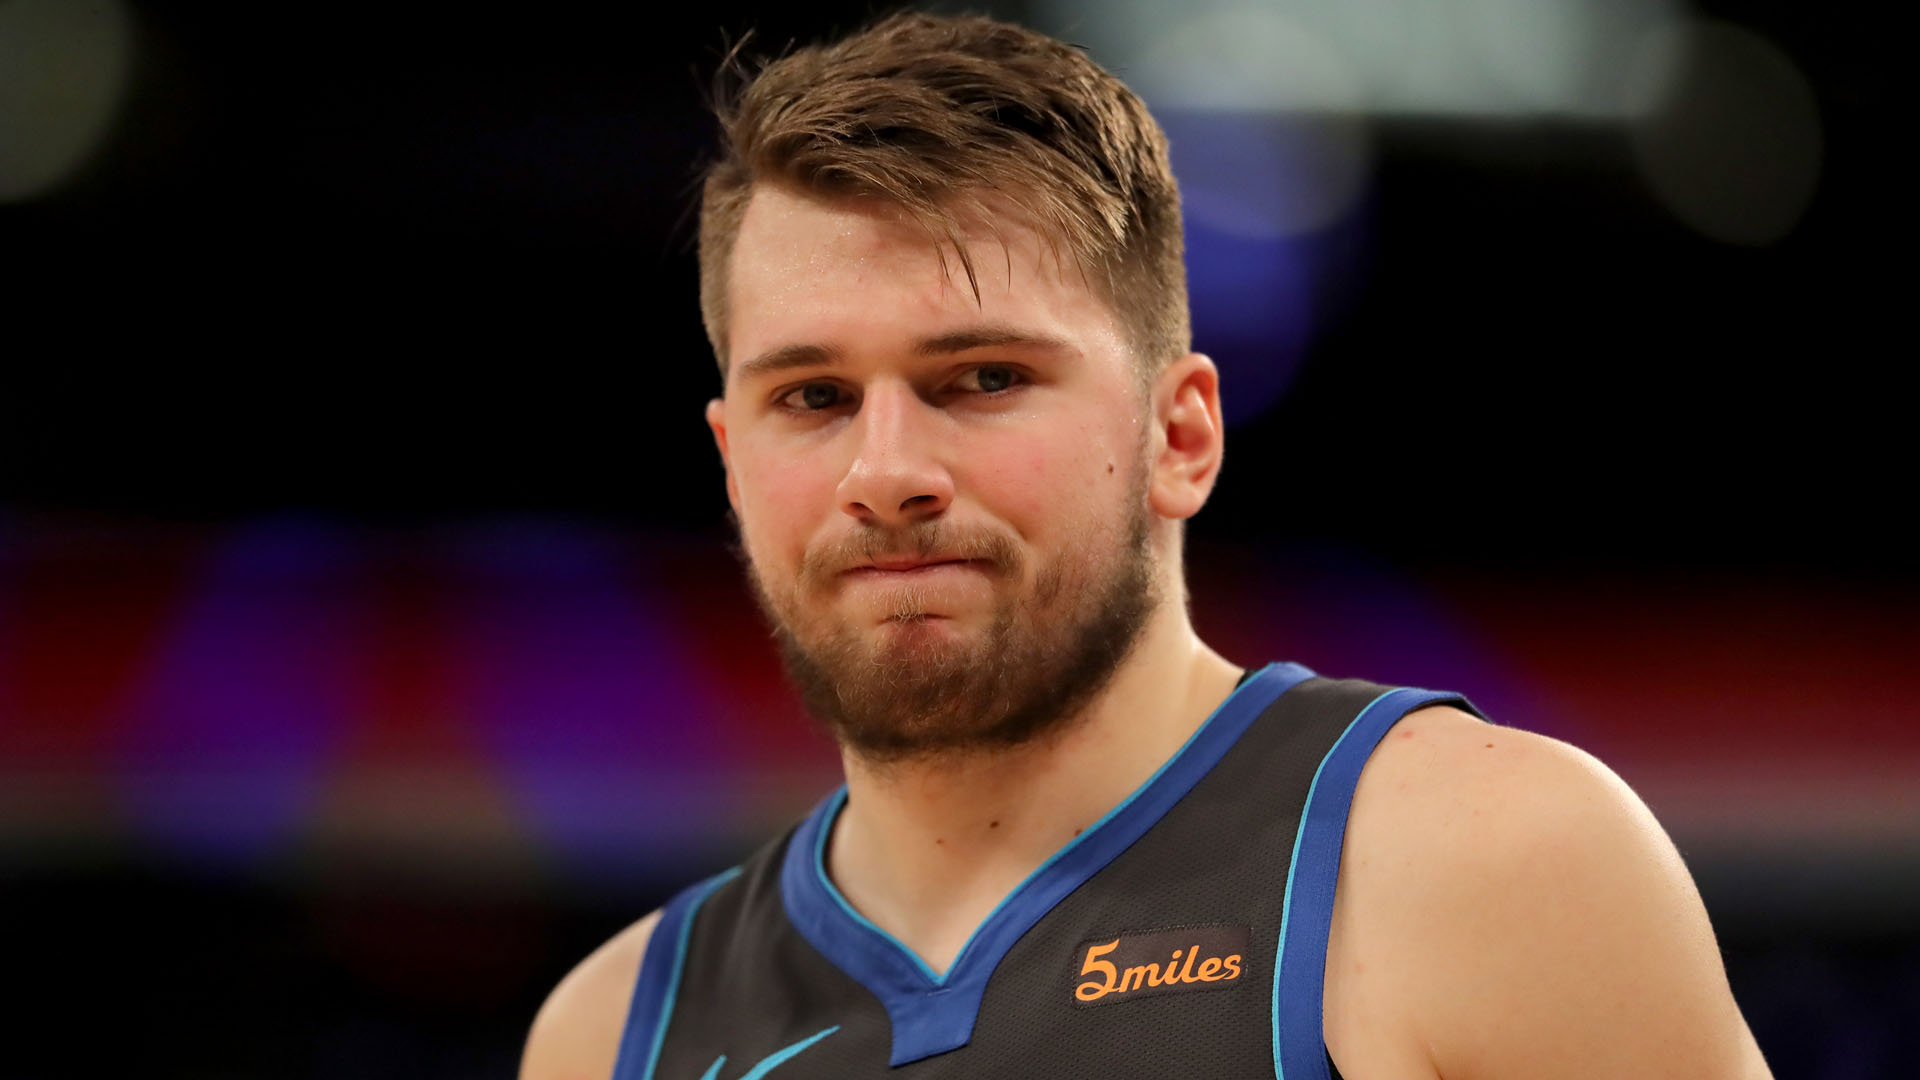 Dwyane Wade came away from Wednesday's 112-101 win over the Dallas Mavericks impressed with NBA rookie Luka Doncic.